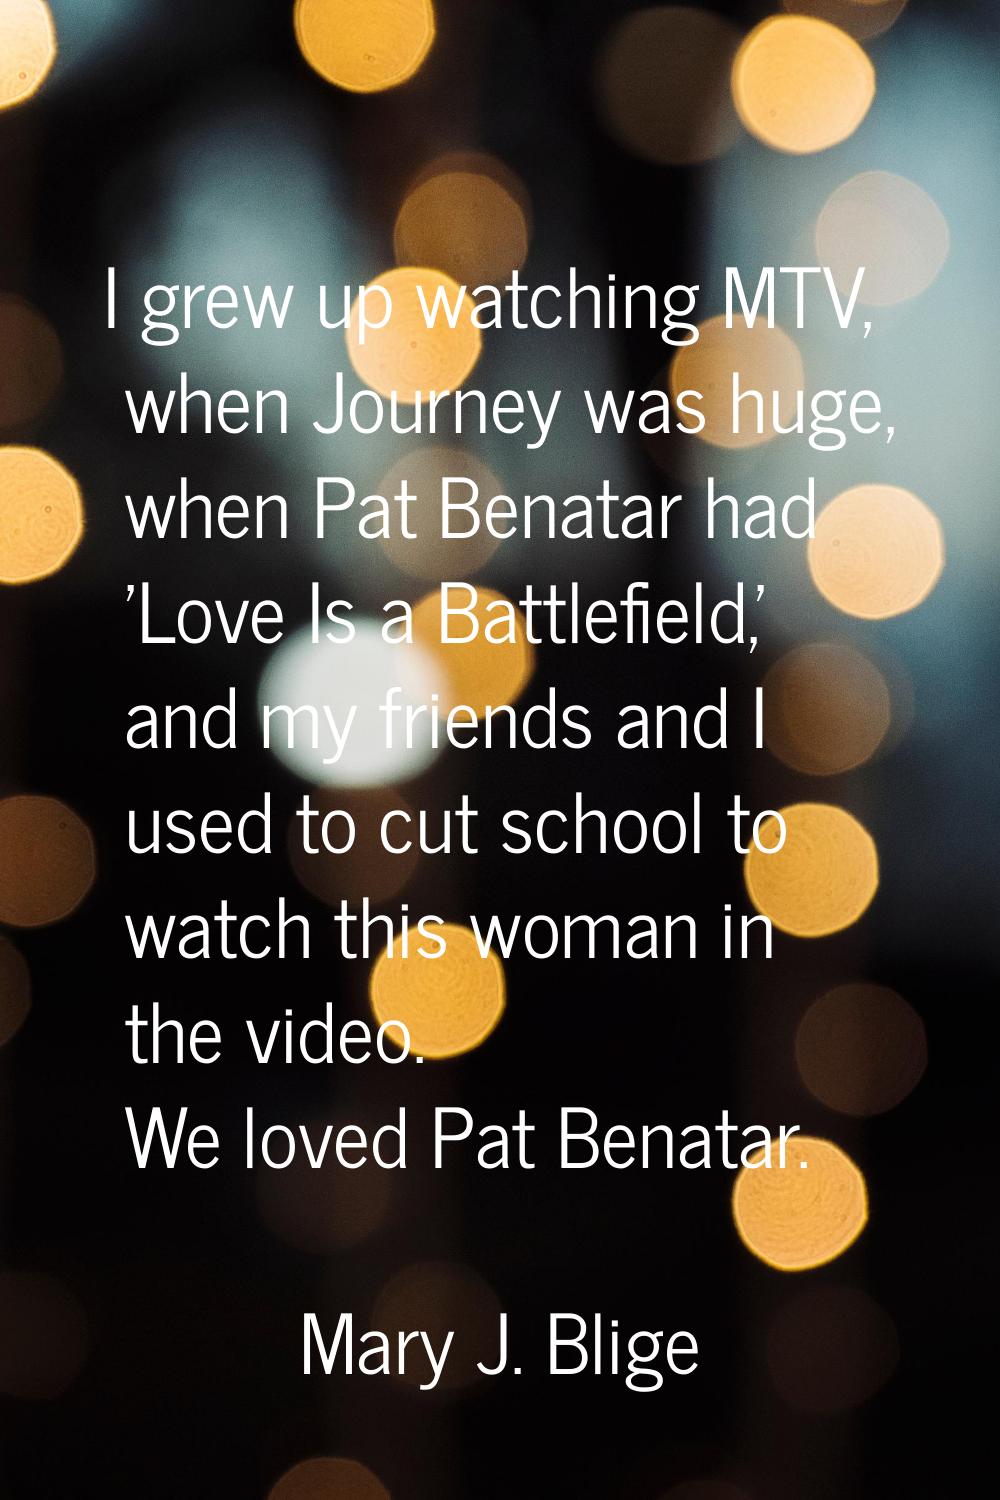 I grew up watching MTV, when Journey was huge, when Pat Benatar had 'Love Is a Battlefield,' and my